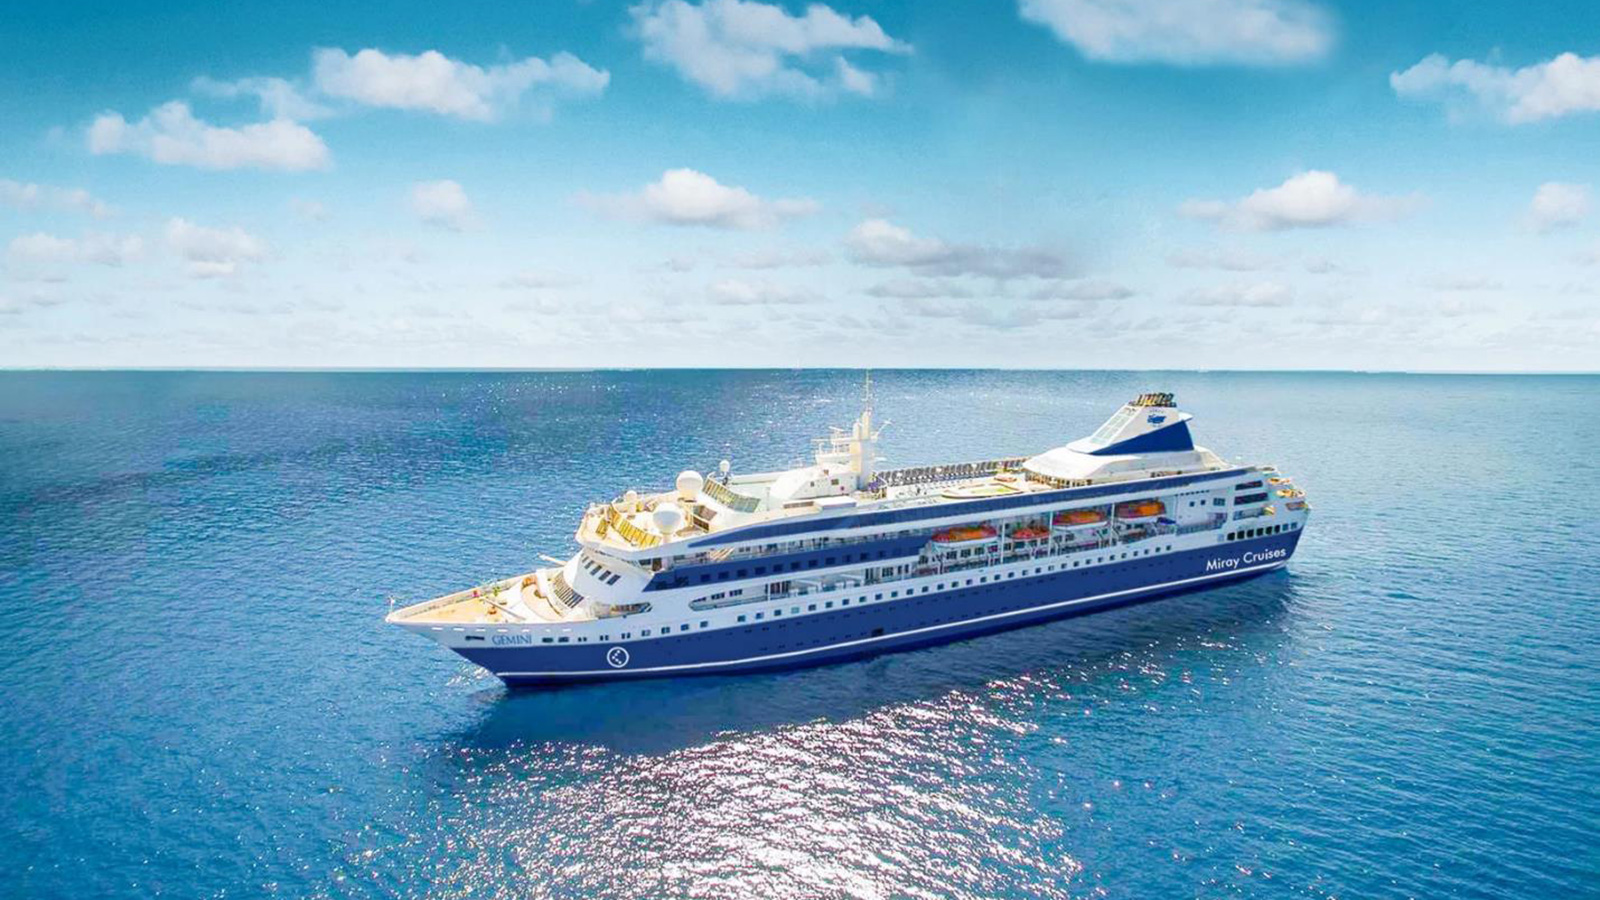 Life at Sea Cruises: You can now live on a cruise ship for $30,000 per year  | CNN Travel